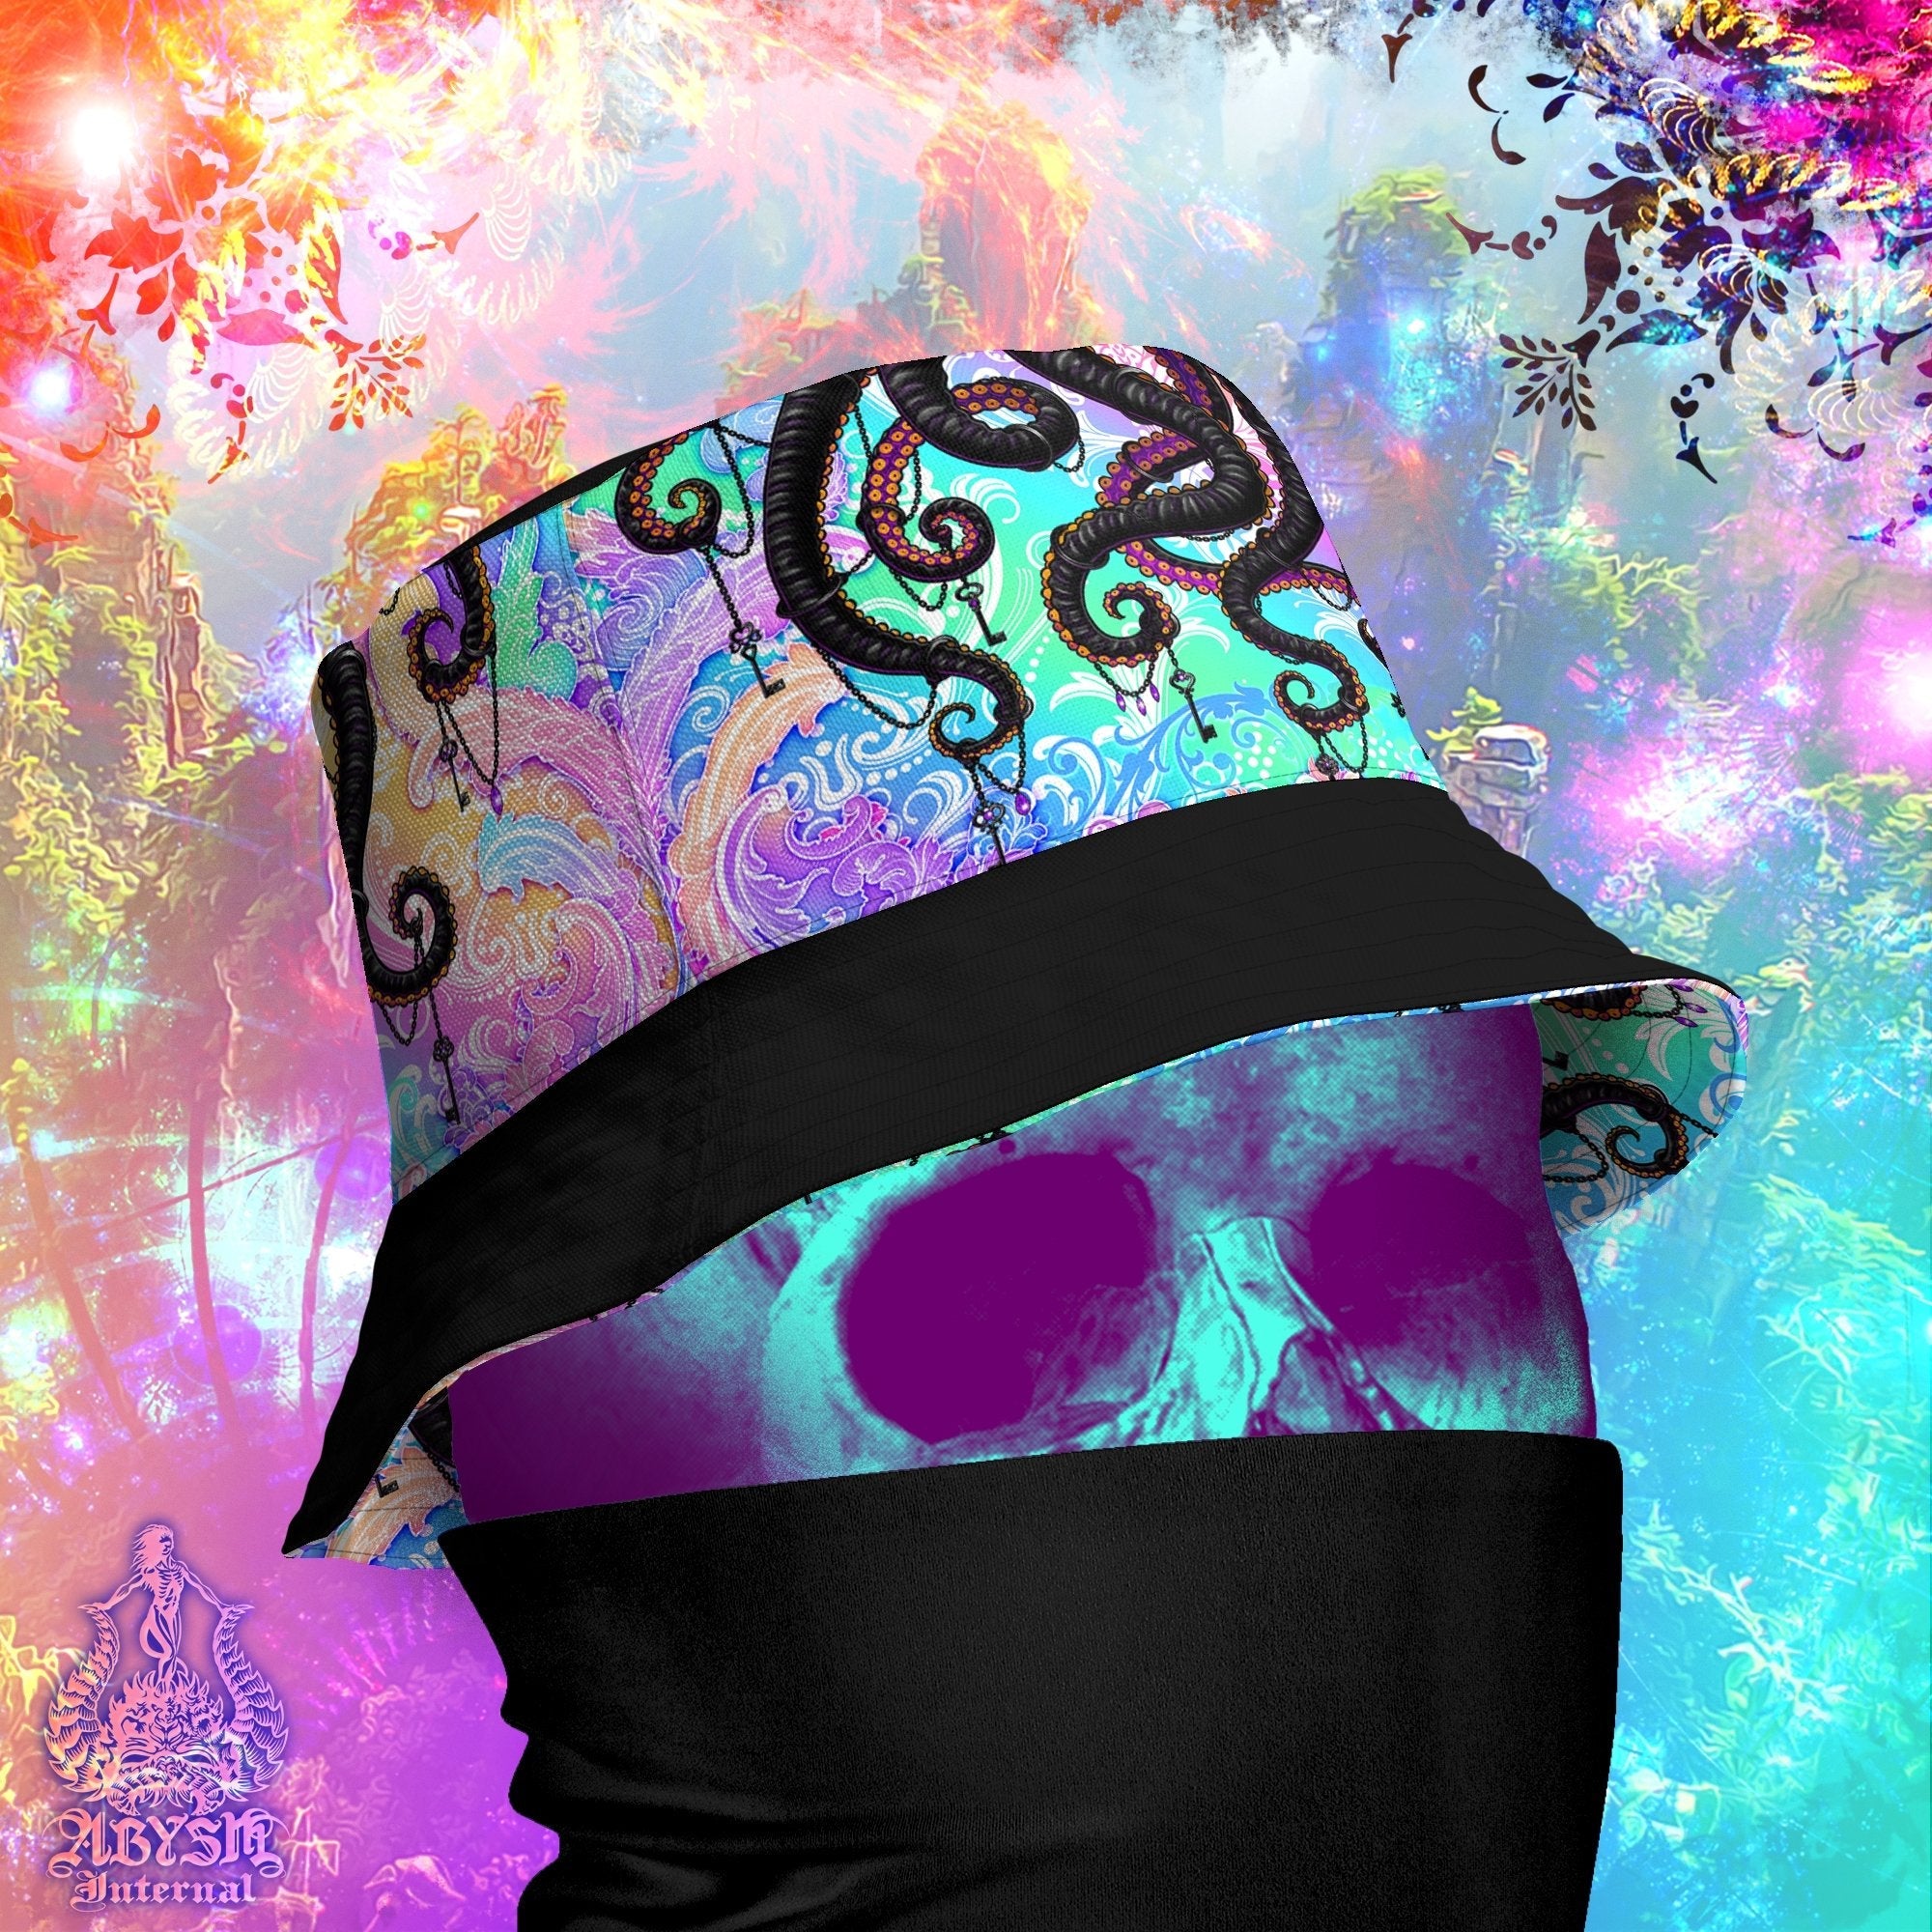 Psychedelic Bucket Hat, Trippy Streetwear, Pastel Summer Hat, Indie Beach Accessory with Linen feel, Reversible & Unisex - Colorful Octopus - Abysm Internal